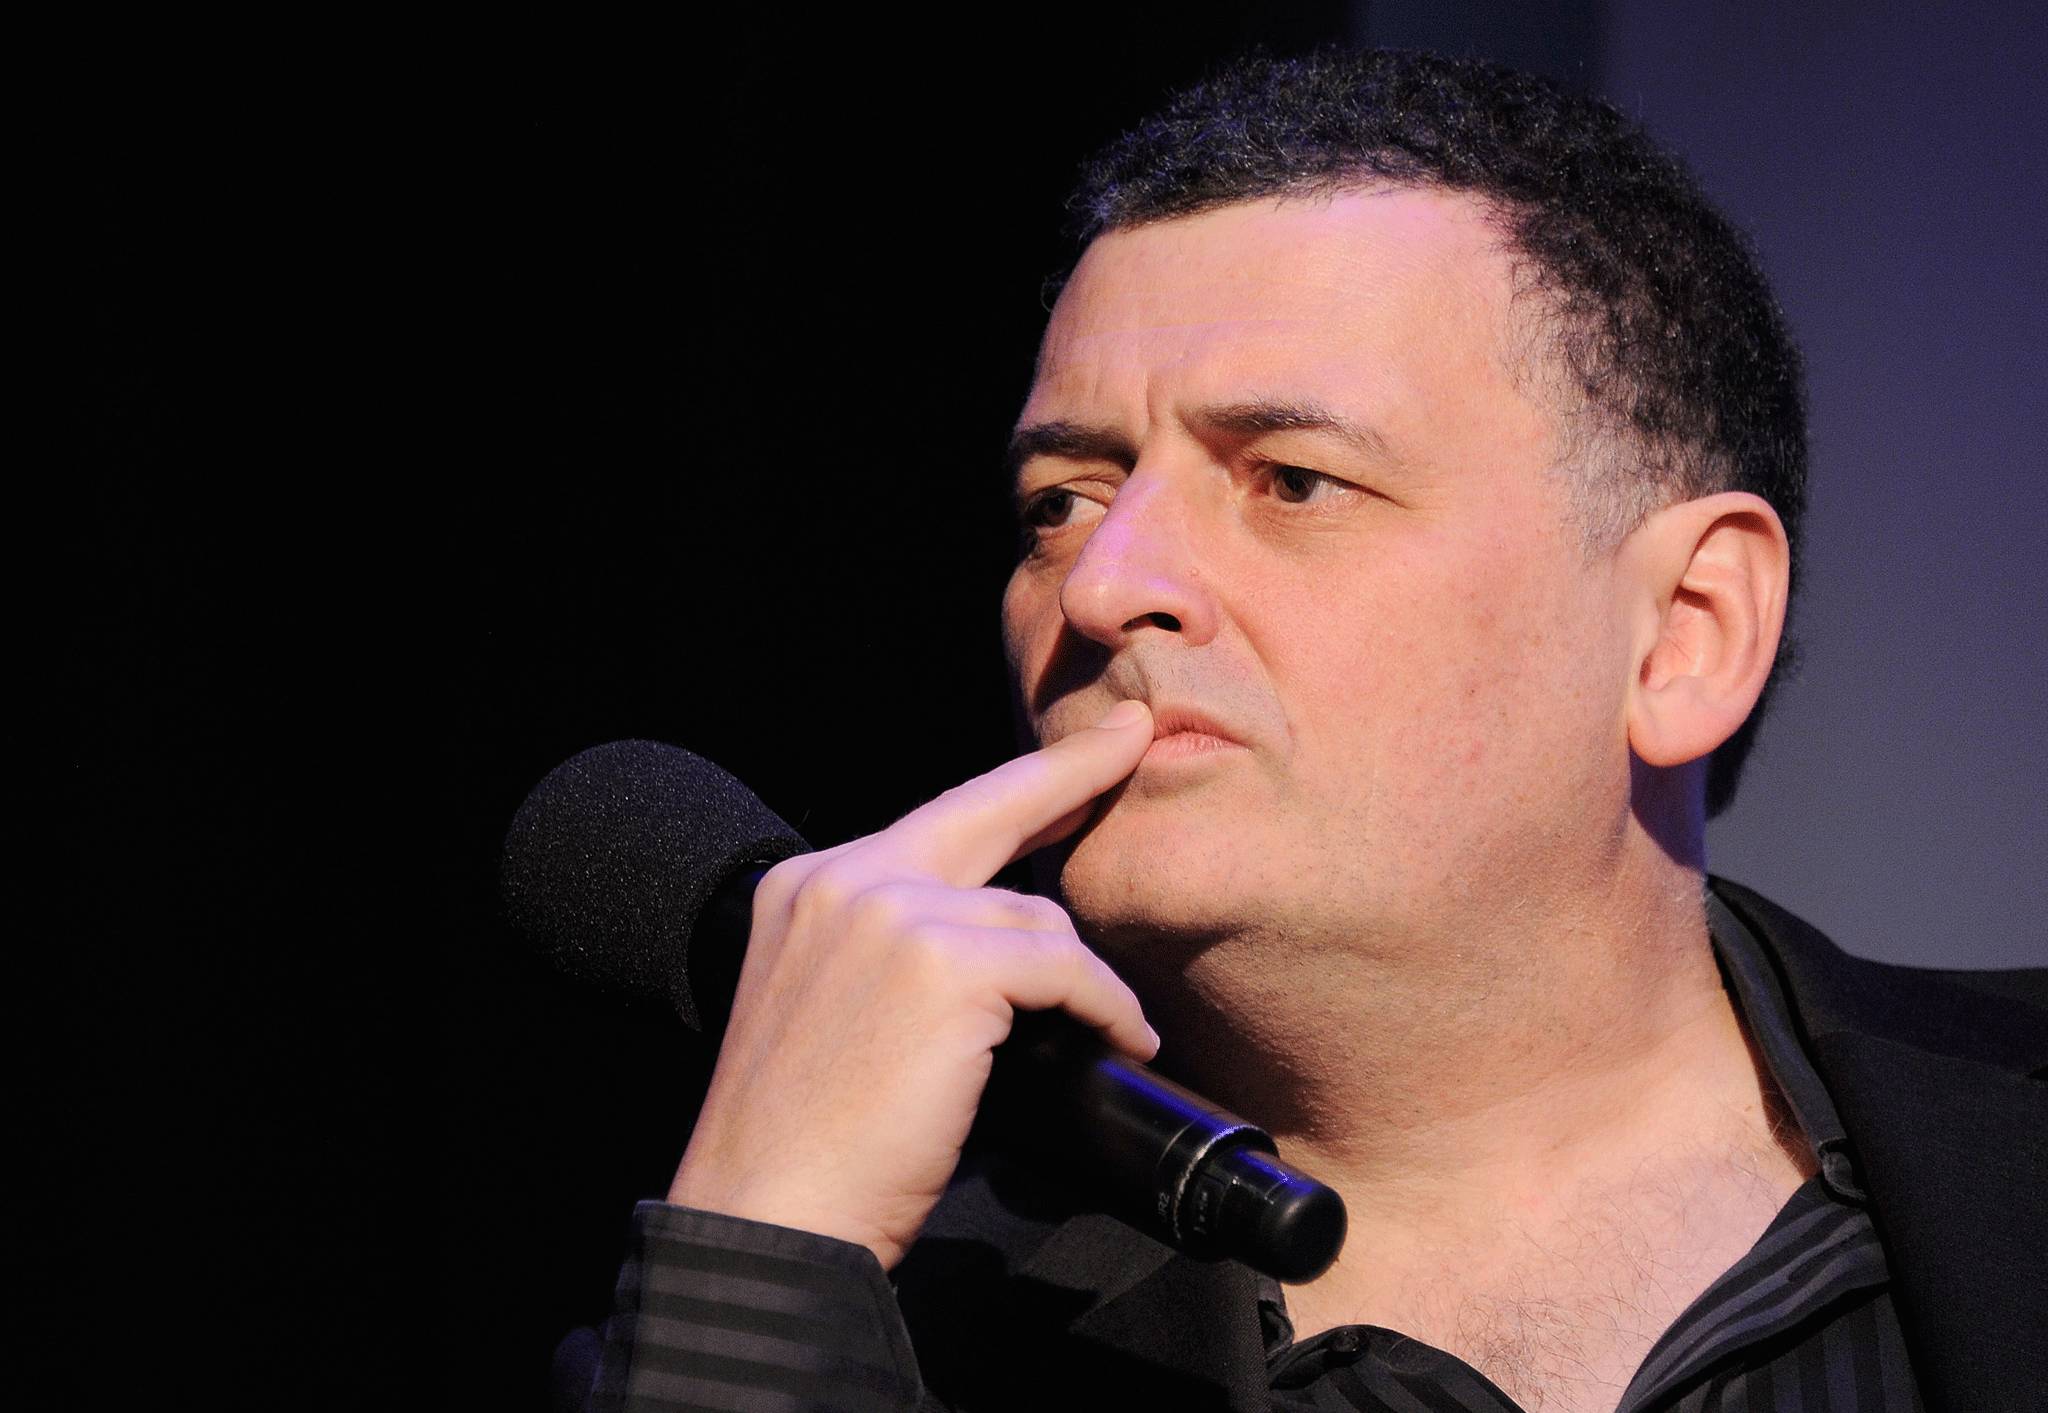 Steven Moffat played down the impact of US TV